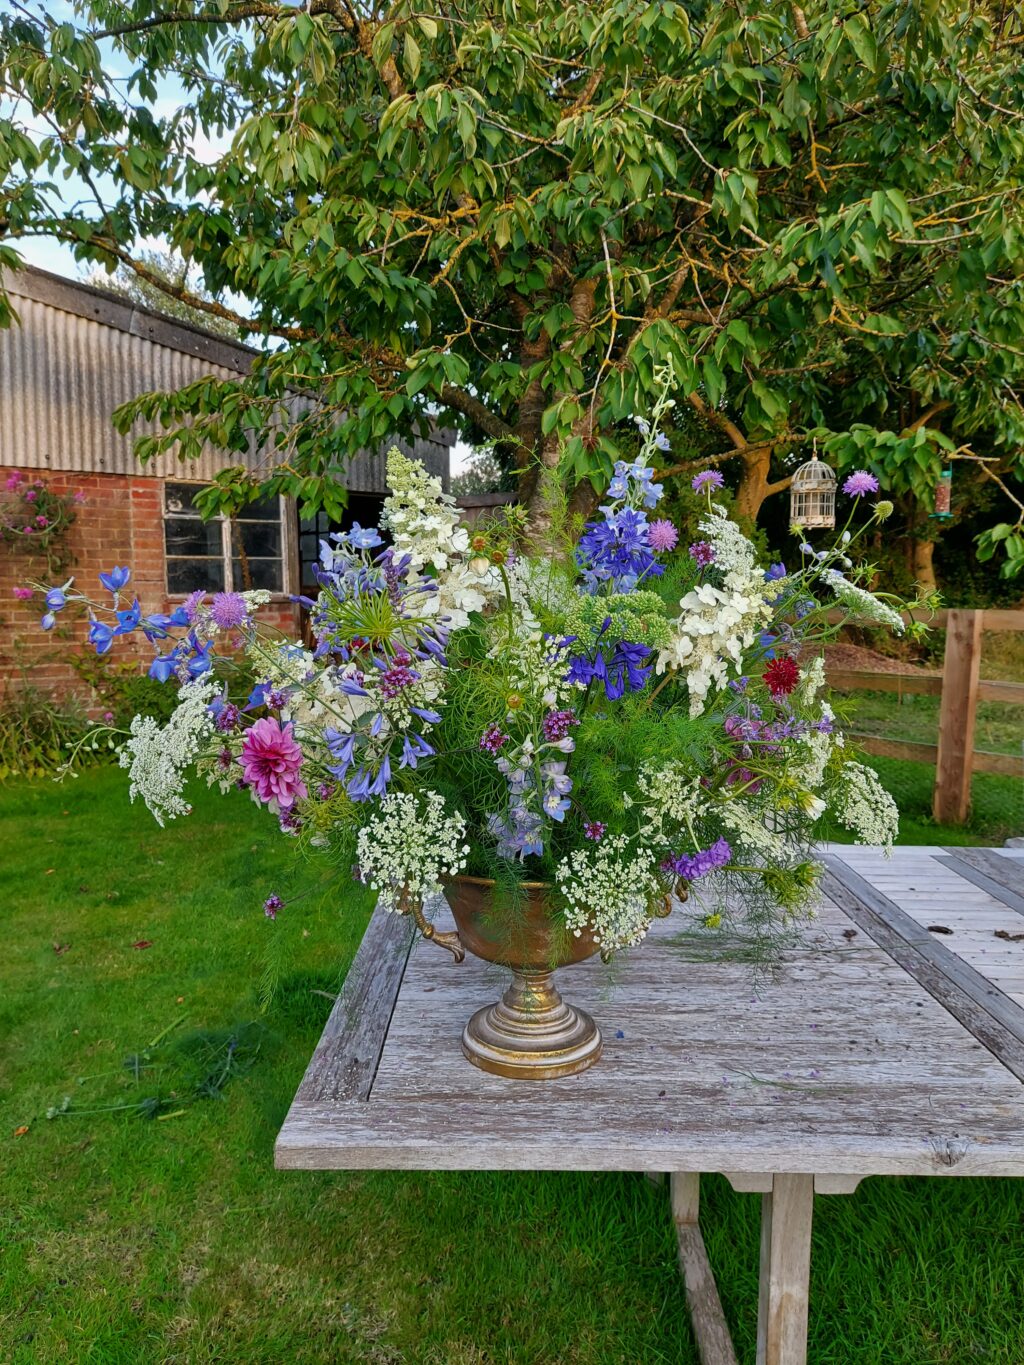 A beautiful urn arrangement made by Louisa Butcher of Brunstead Blooms using sustainable mechanics